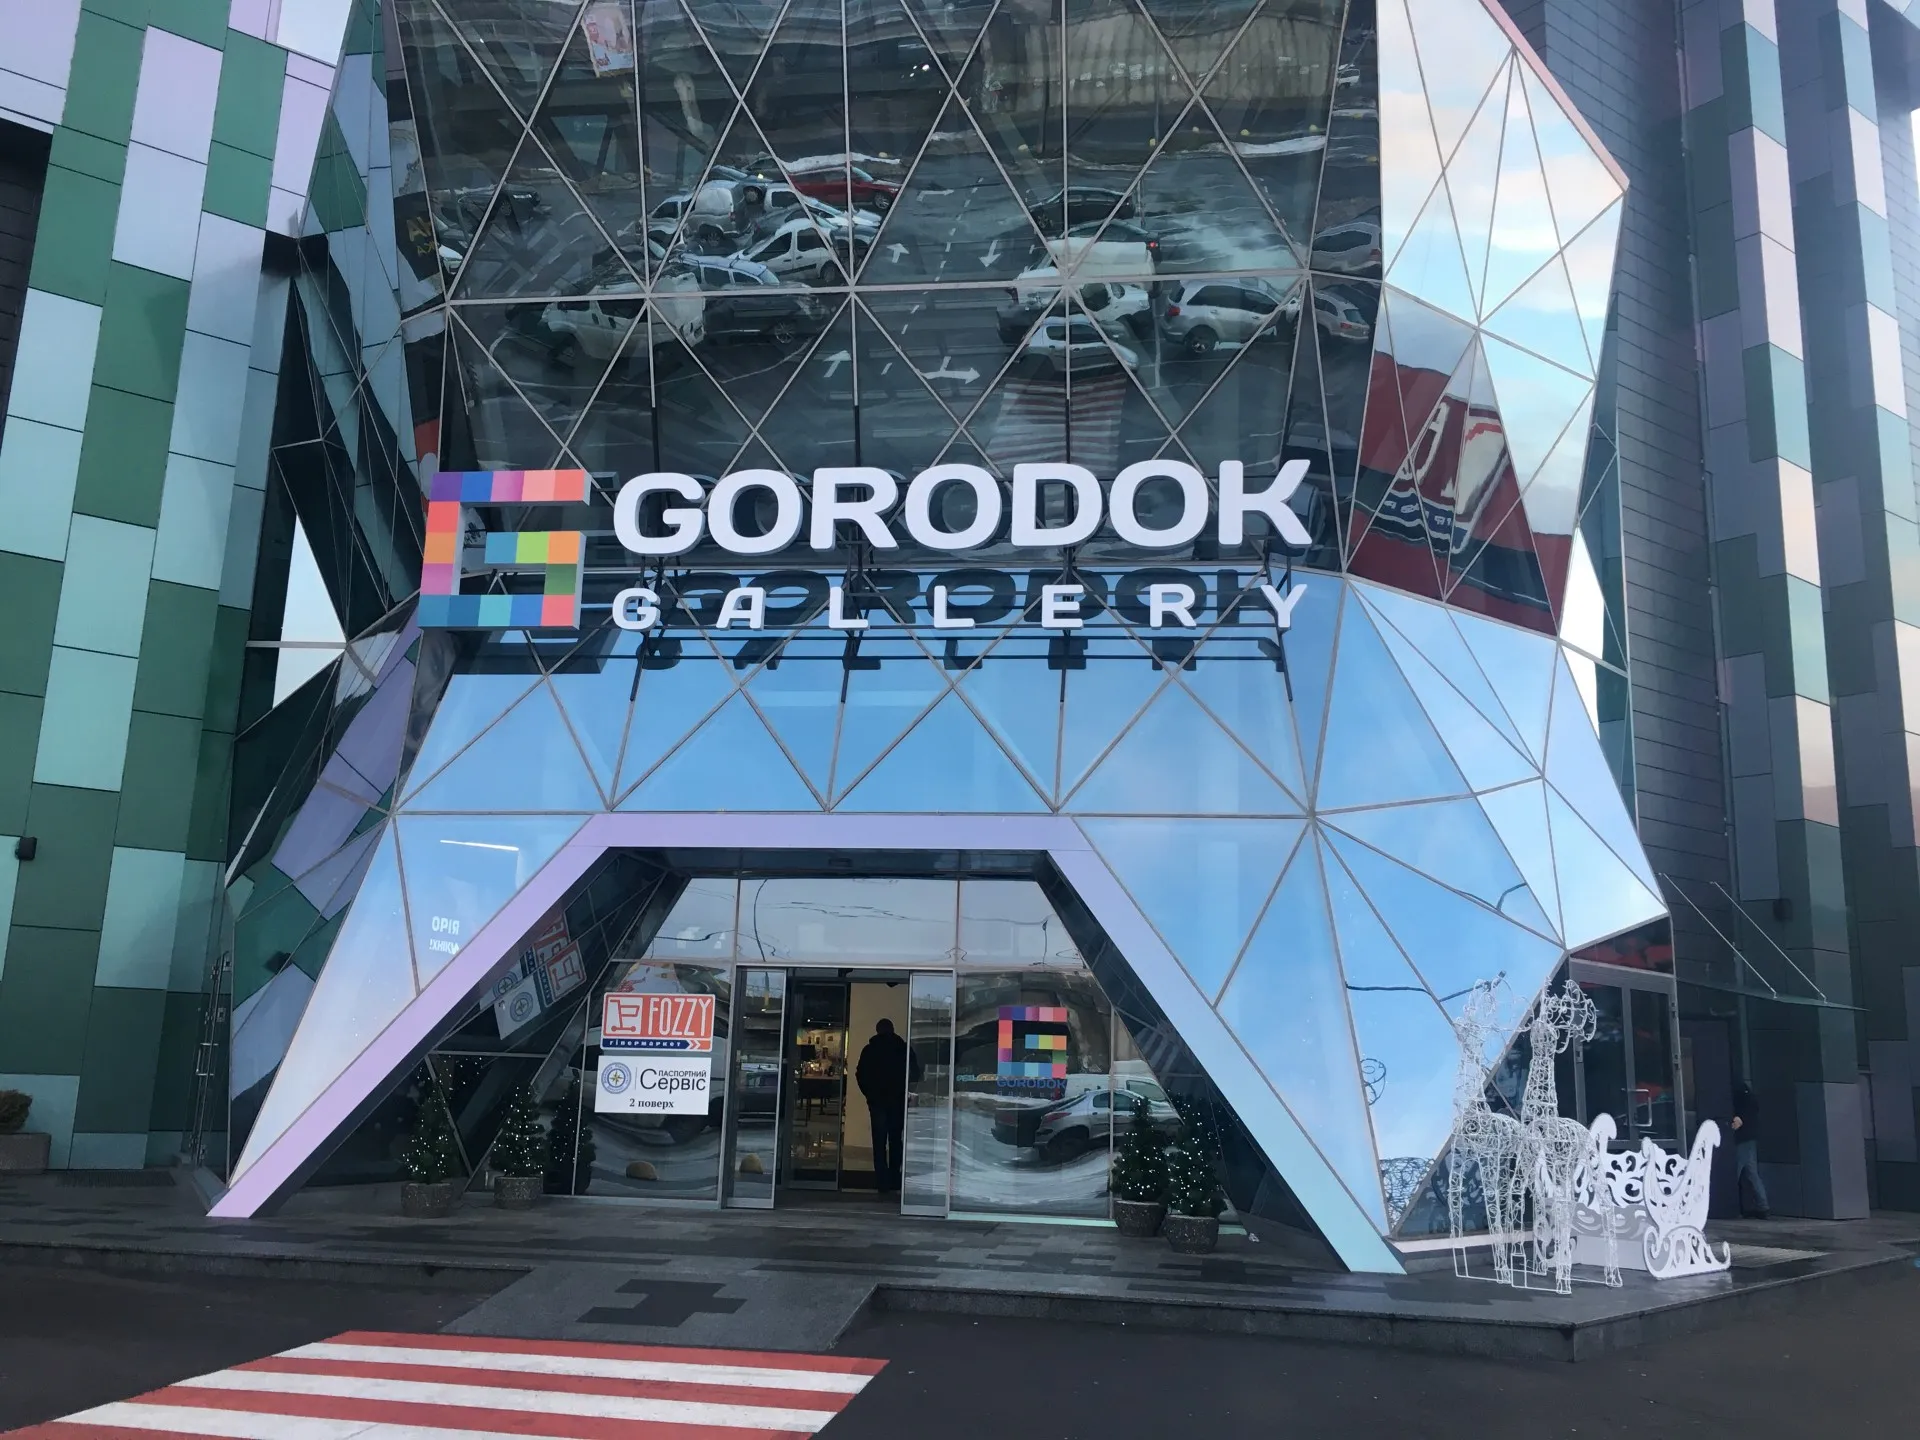 Gorodok Gallery in Ukraine, europe | Sporting Equipment,Shoes,Clothes,Natural Beauty Products,Sportswear - Country Helper